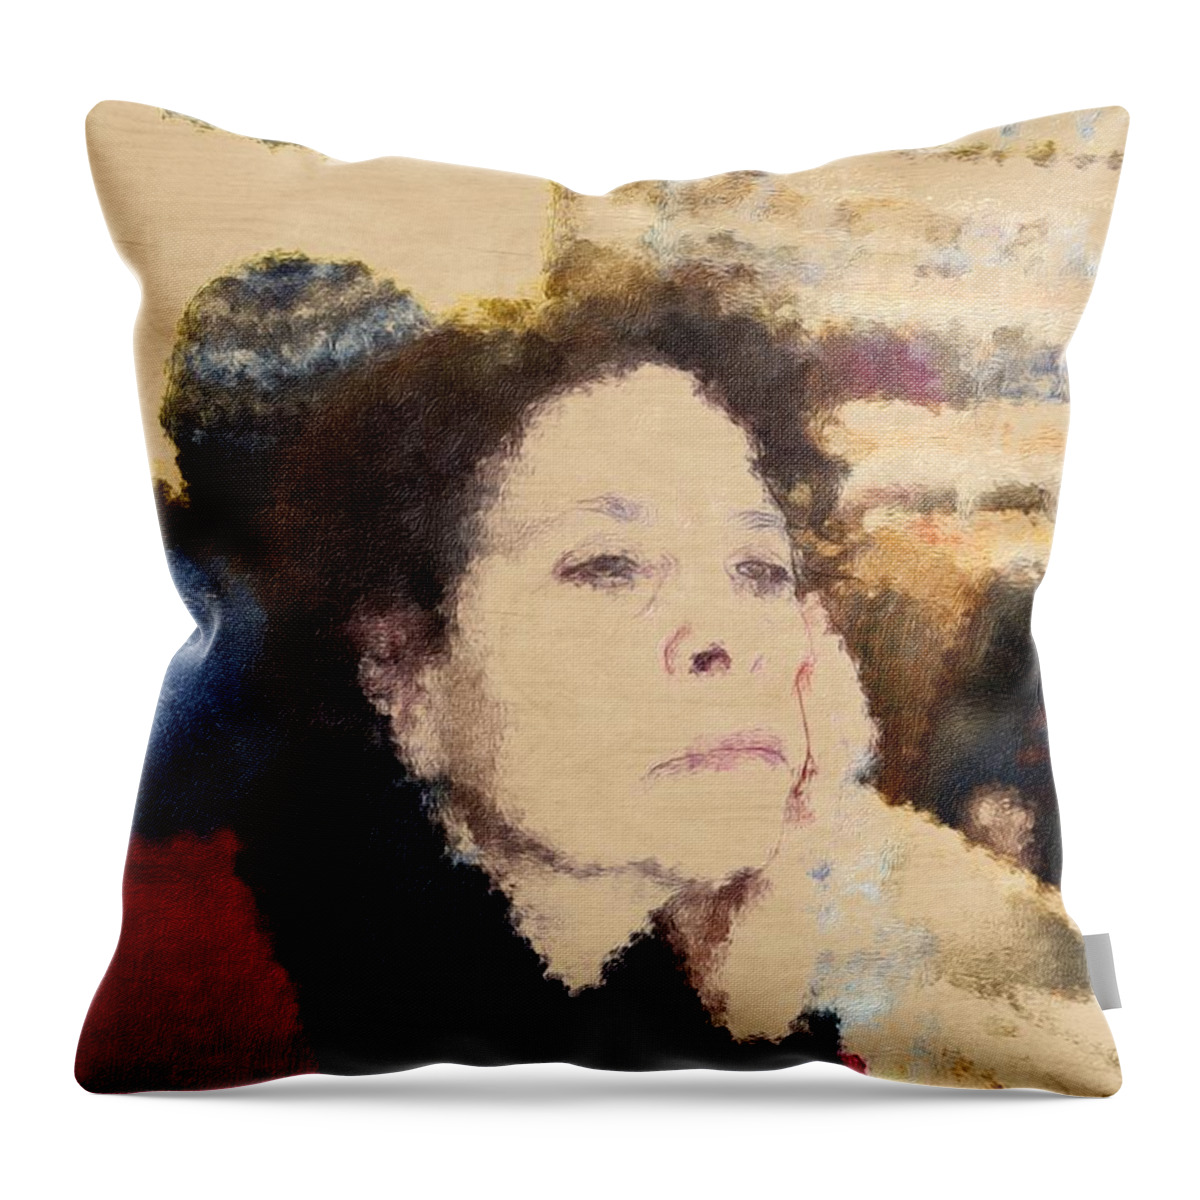 Watercolored Photoshop Throw Pillow featuring the digital art Bridget at the Bards by Steve Glines